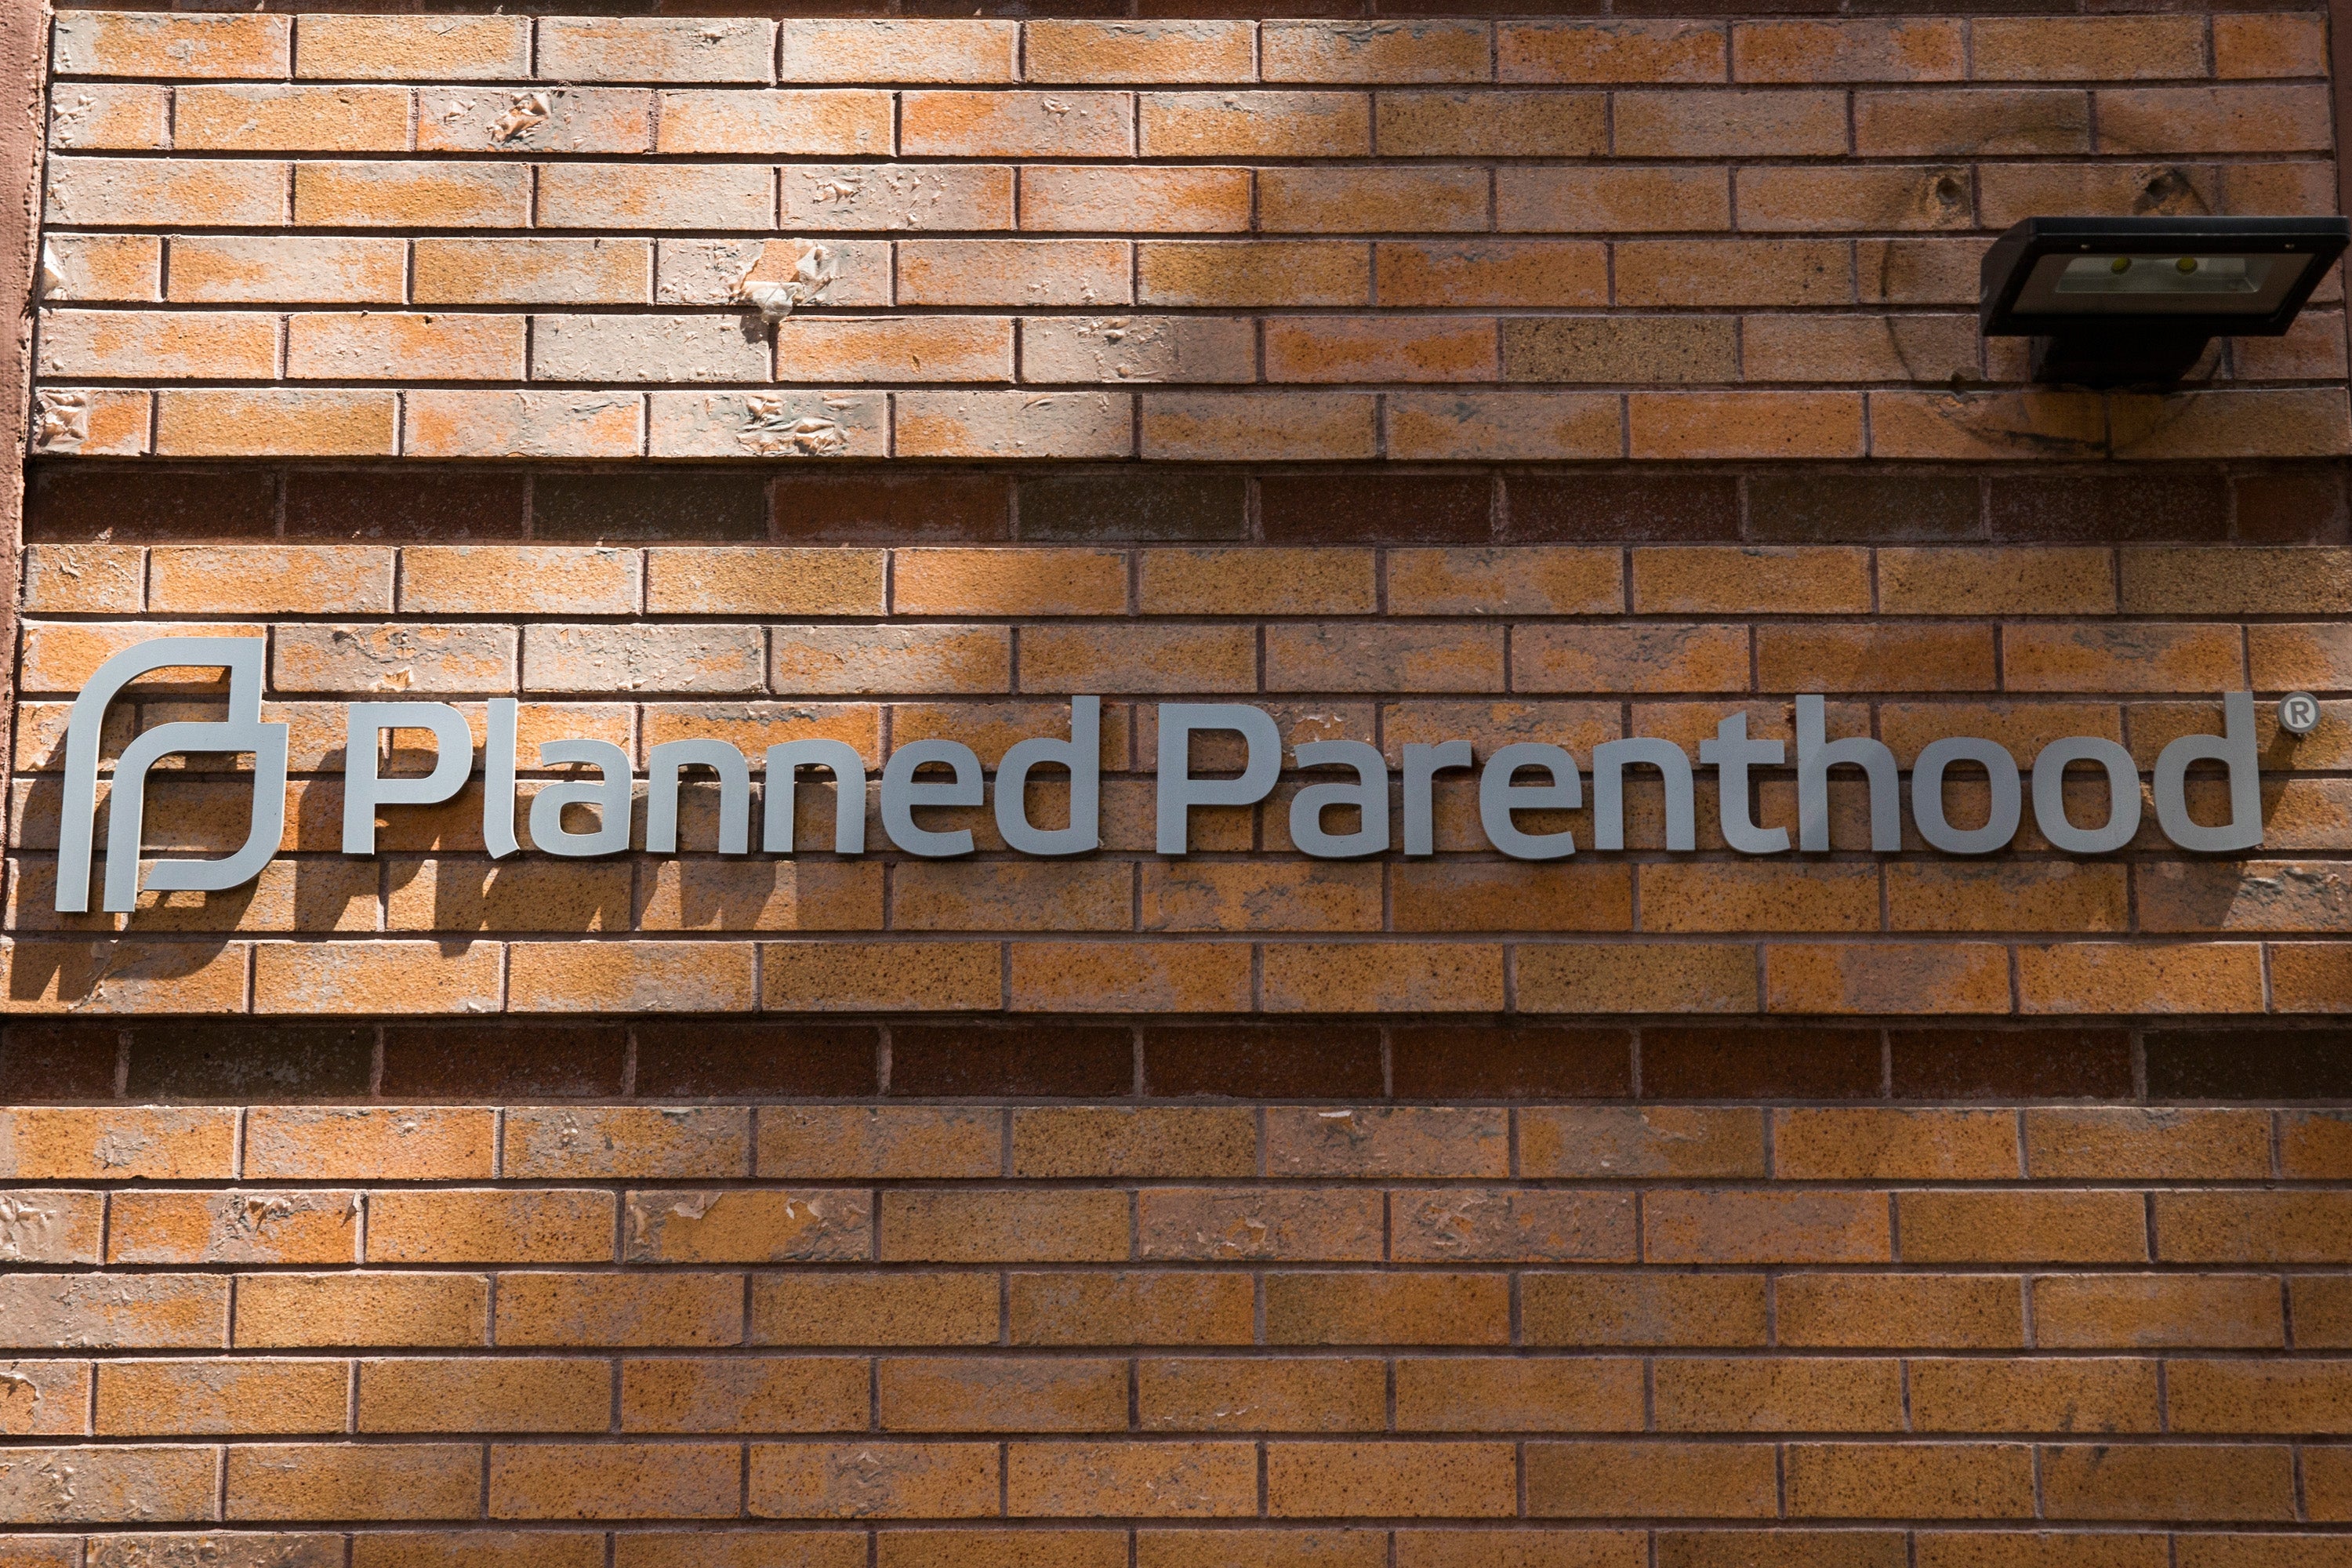 U.S. Appeals Court: Arkansas Can Block Medicaid Funding To Planned Parenthood
